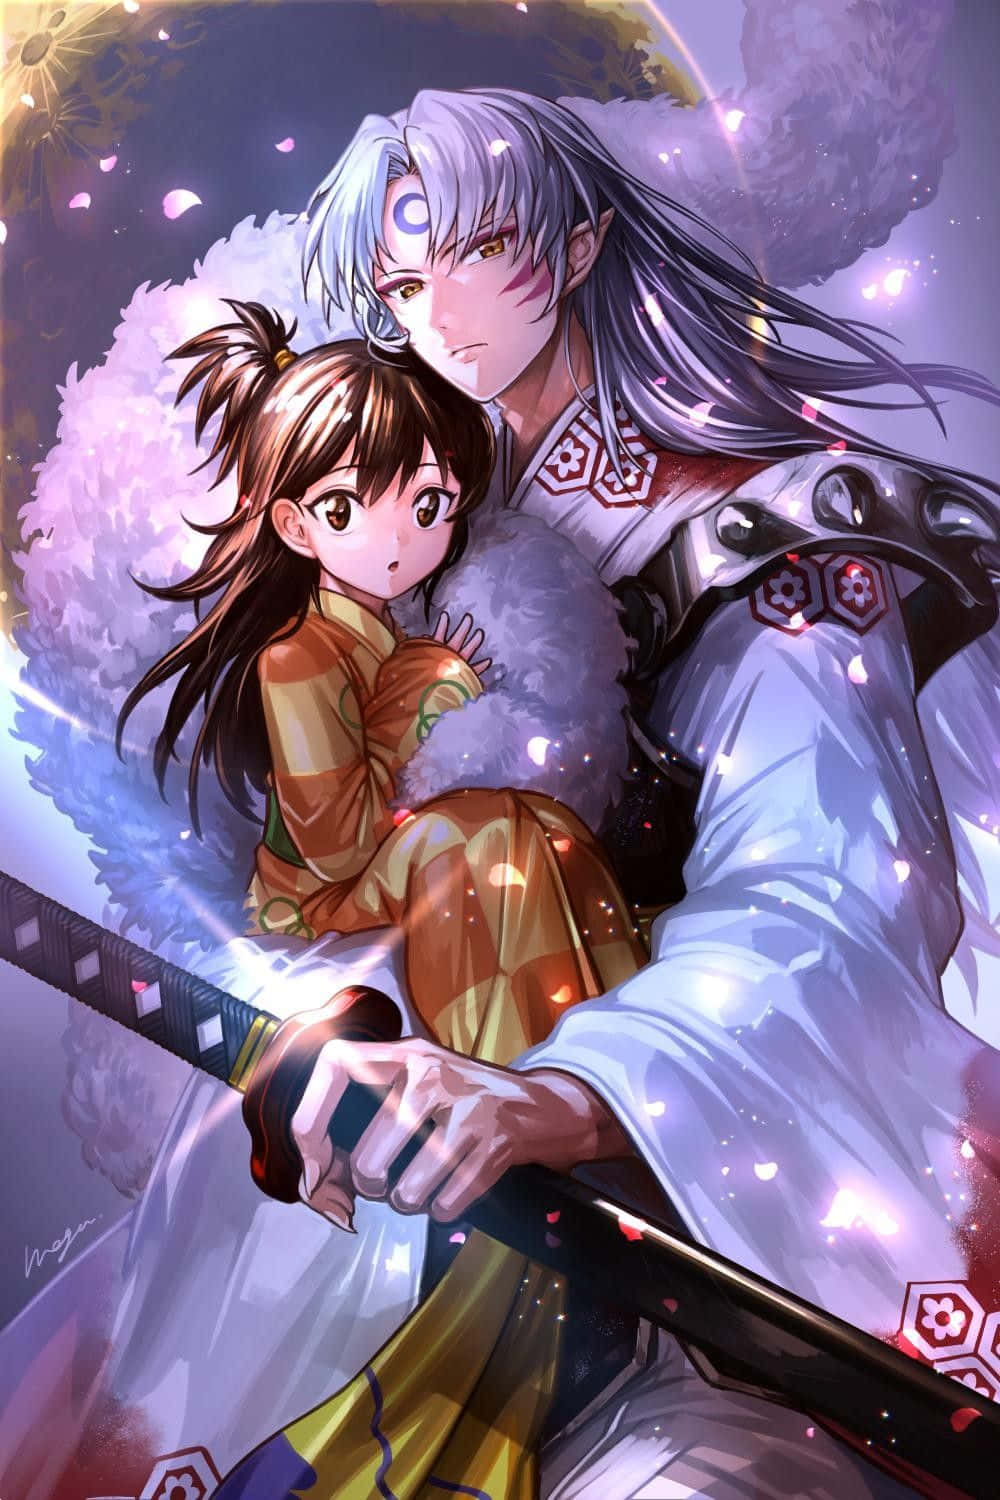 Caption: Inuyasha and Rin sharing a tender moment together. Wallpaper